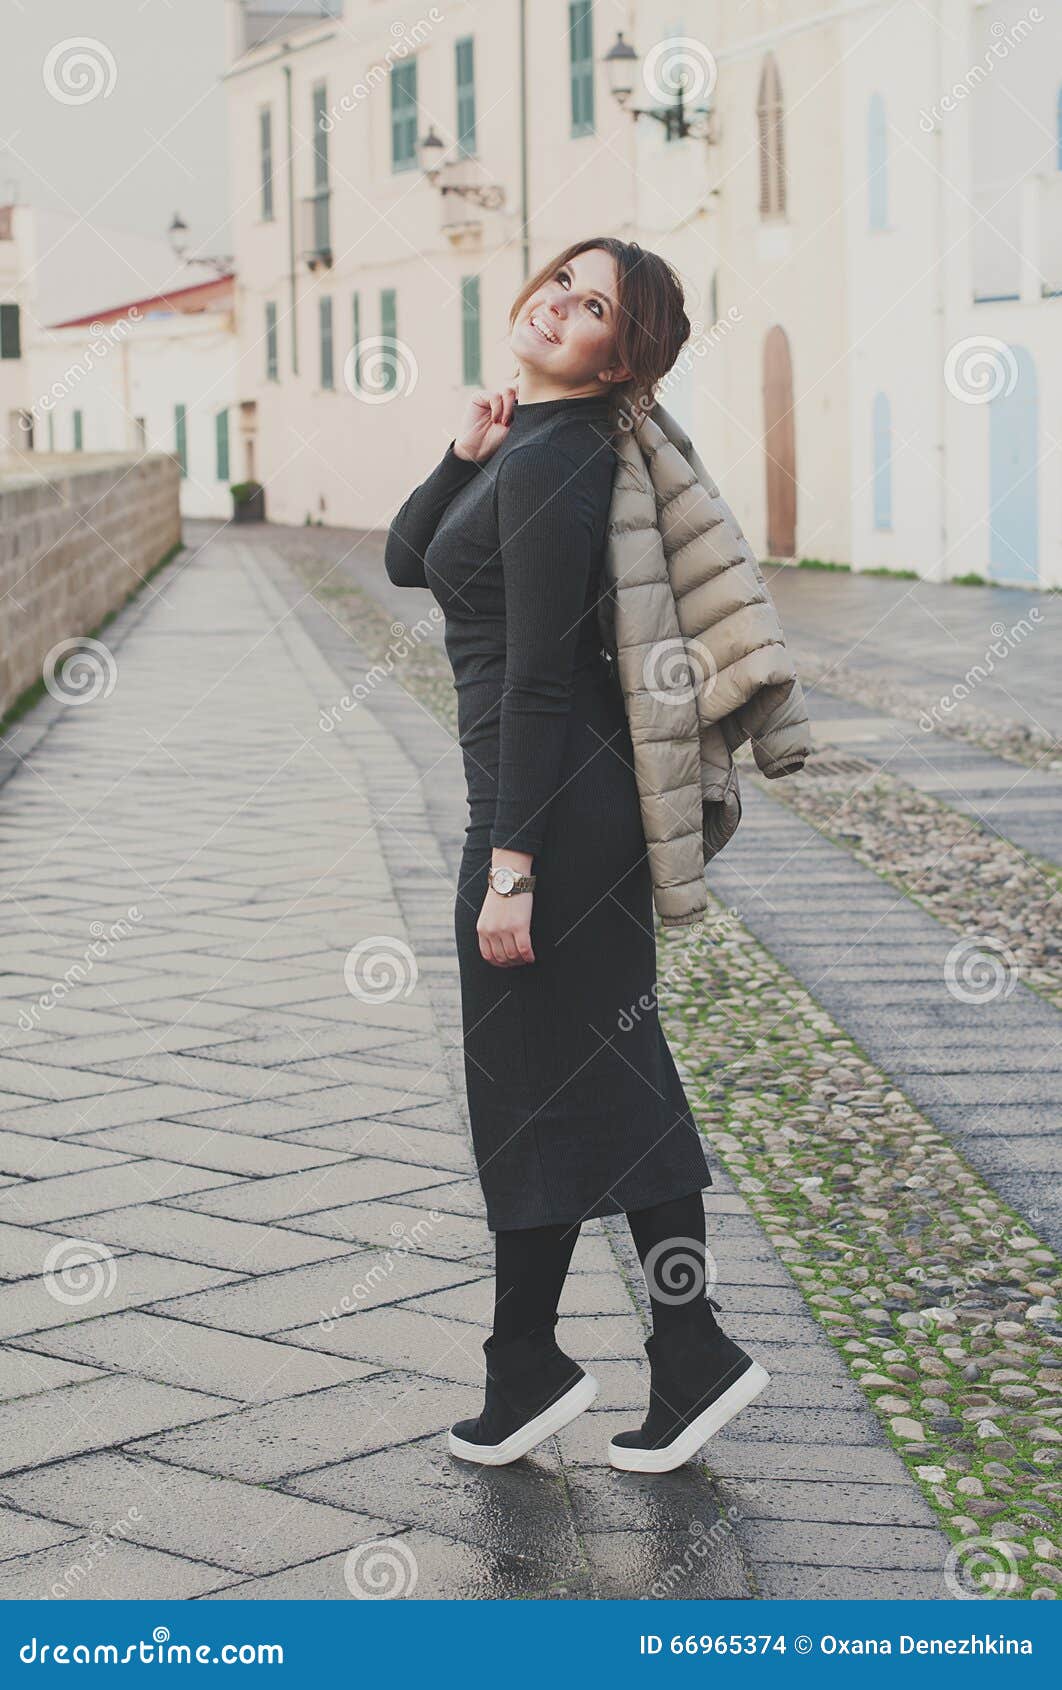 Young Beautiful Woman in the Small Italian City Stock Photo - Image of ...